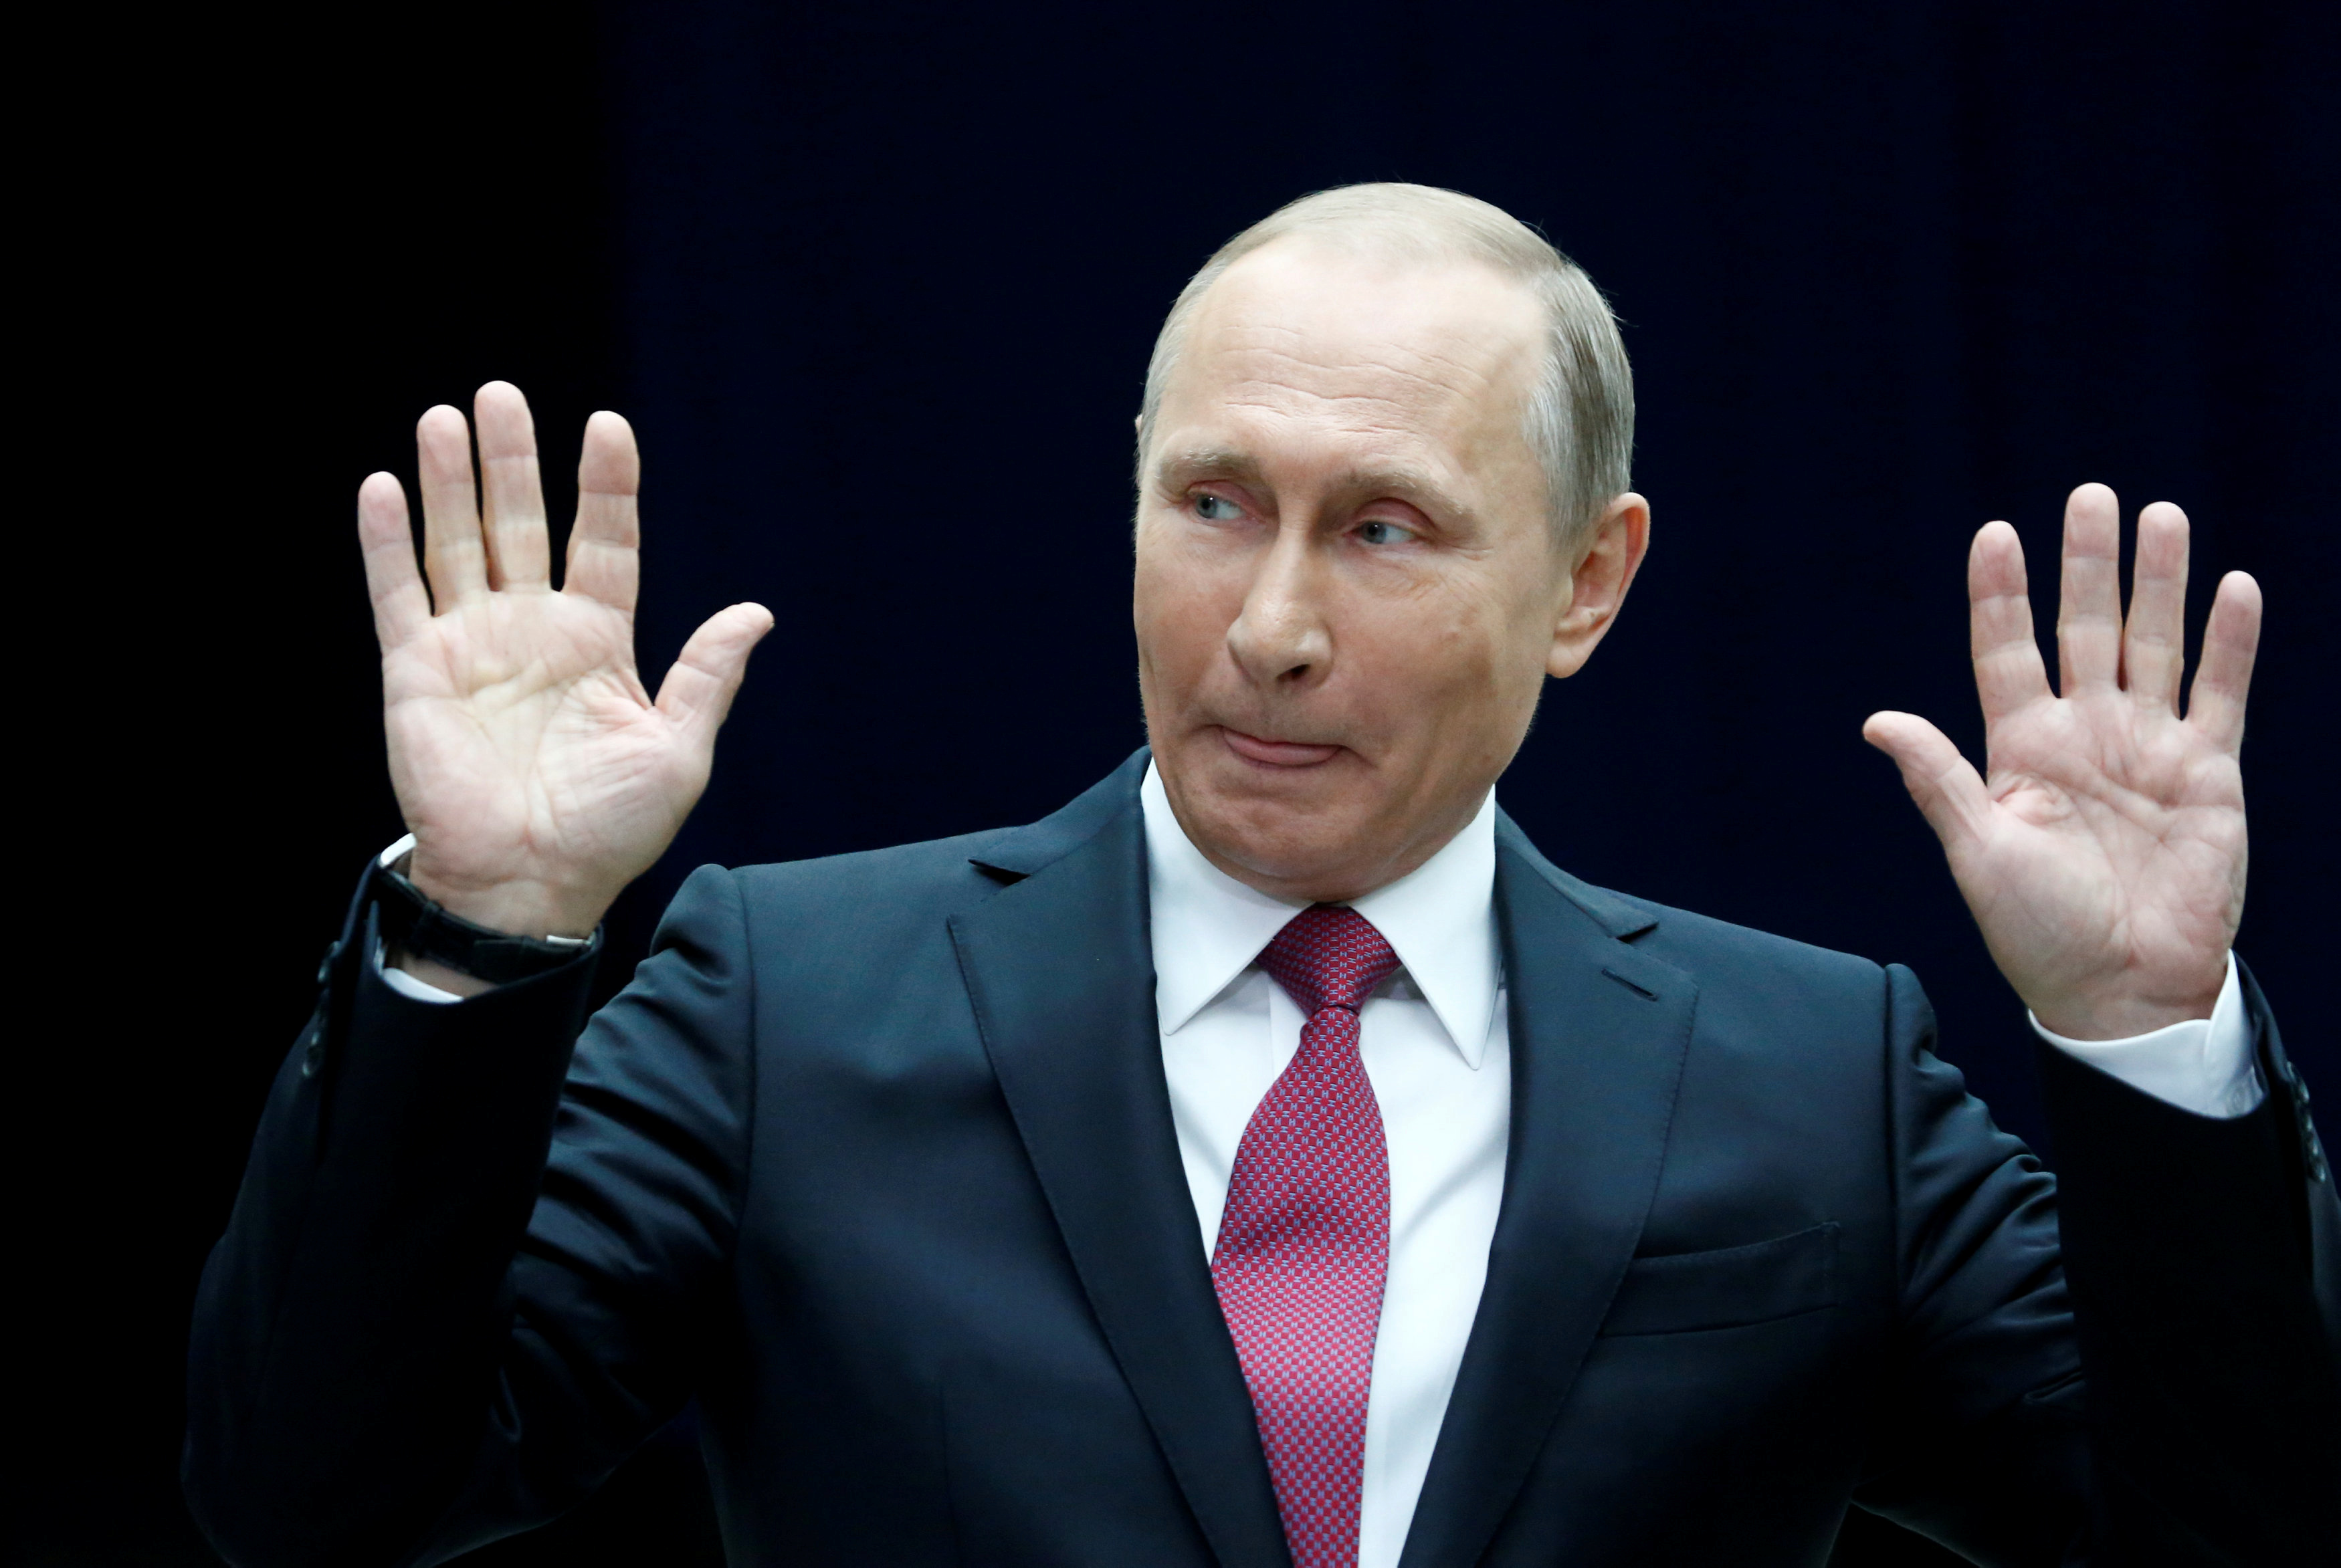 Putin: Leader in artificial intelligence will rule world